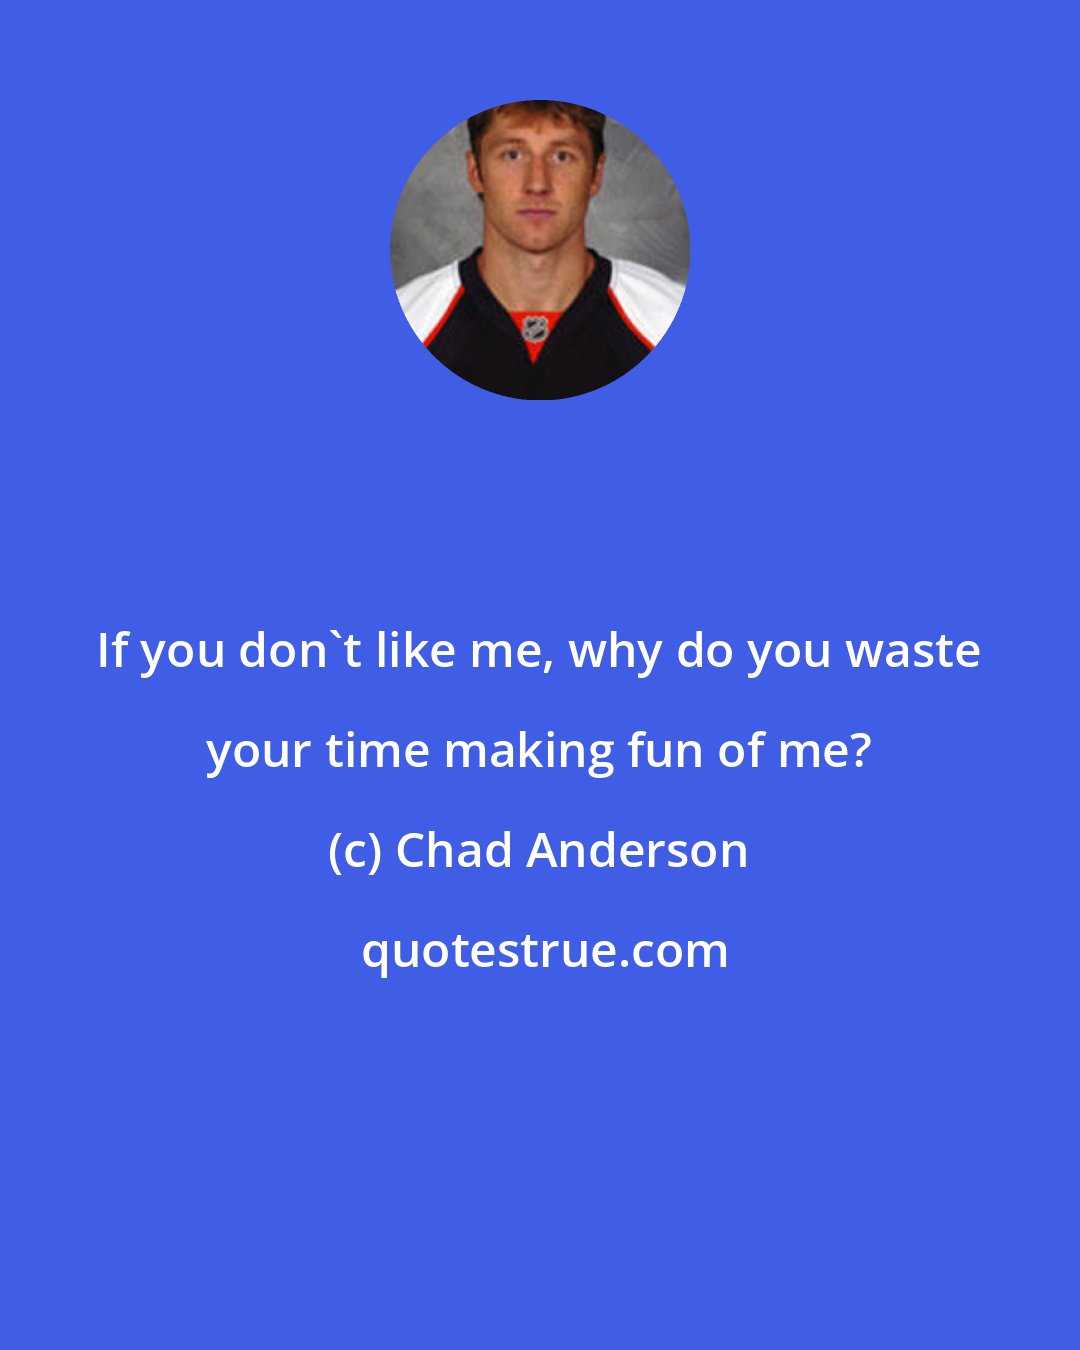 Chad Anderson: If you don't like me, why do you waste your time making fun of me?